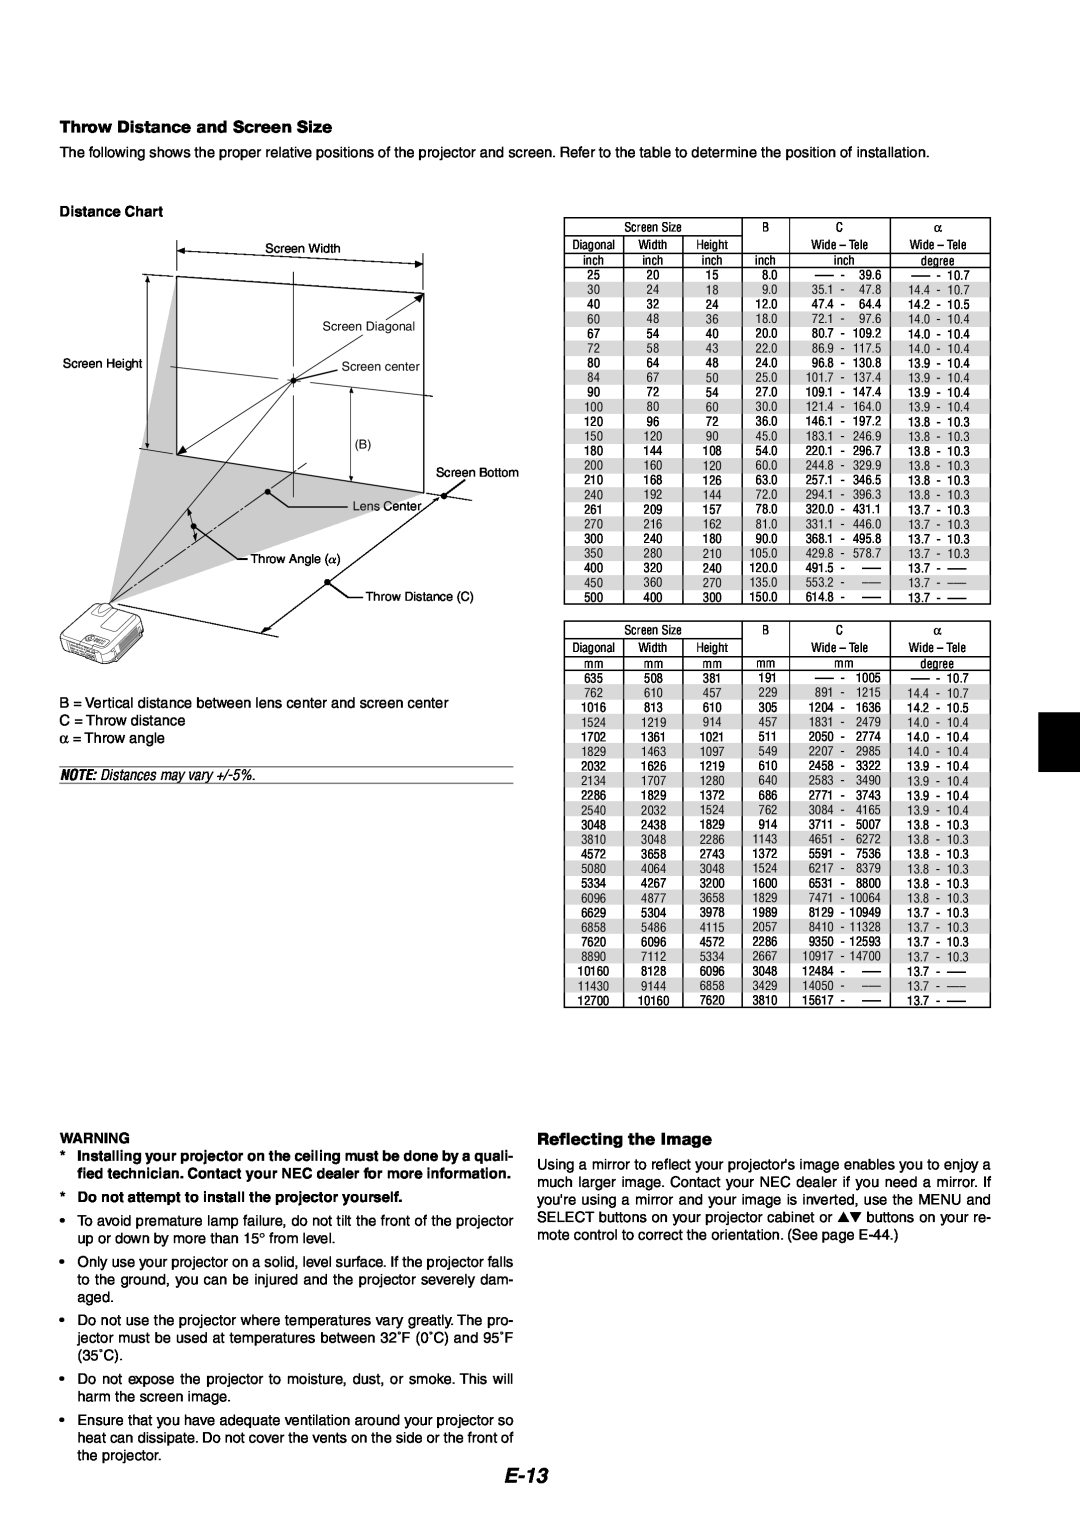 NEC MT1060 user manual E-13, Throw Distance and Screen Size, Reflecting the Image 